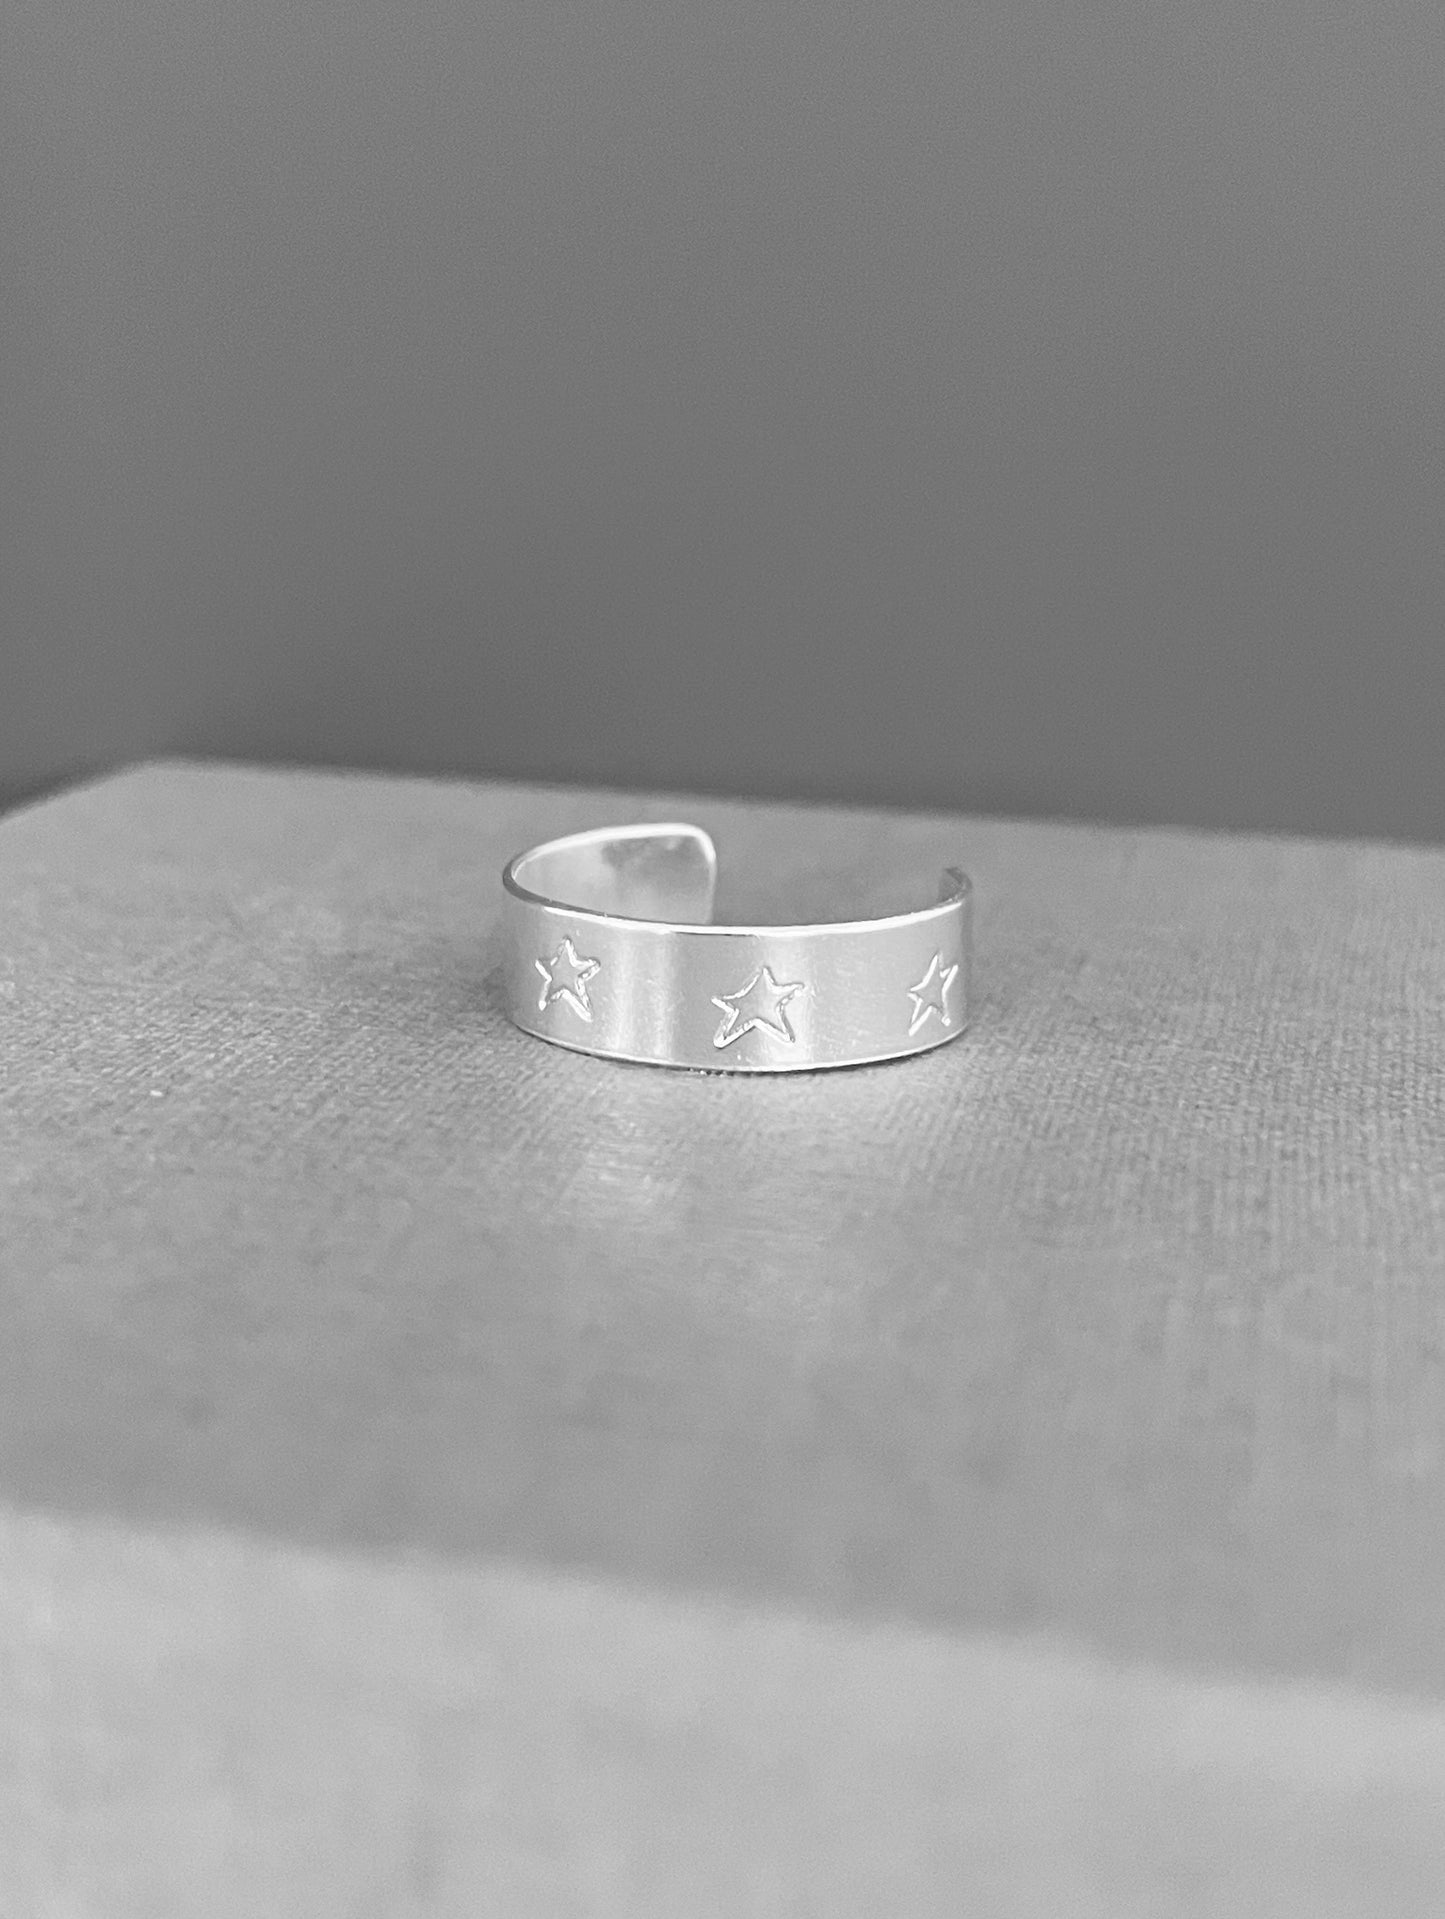 Sterling silver toe ring, adjustable toe ring